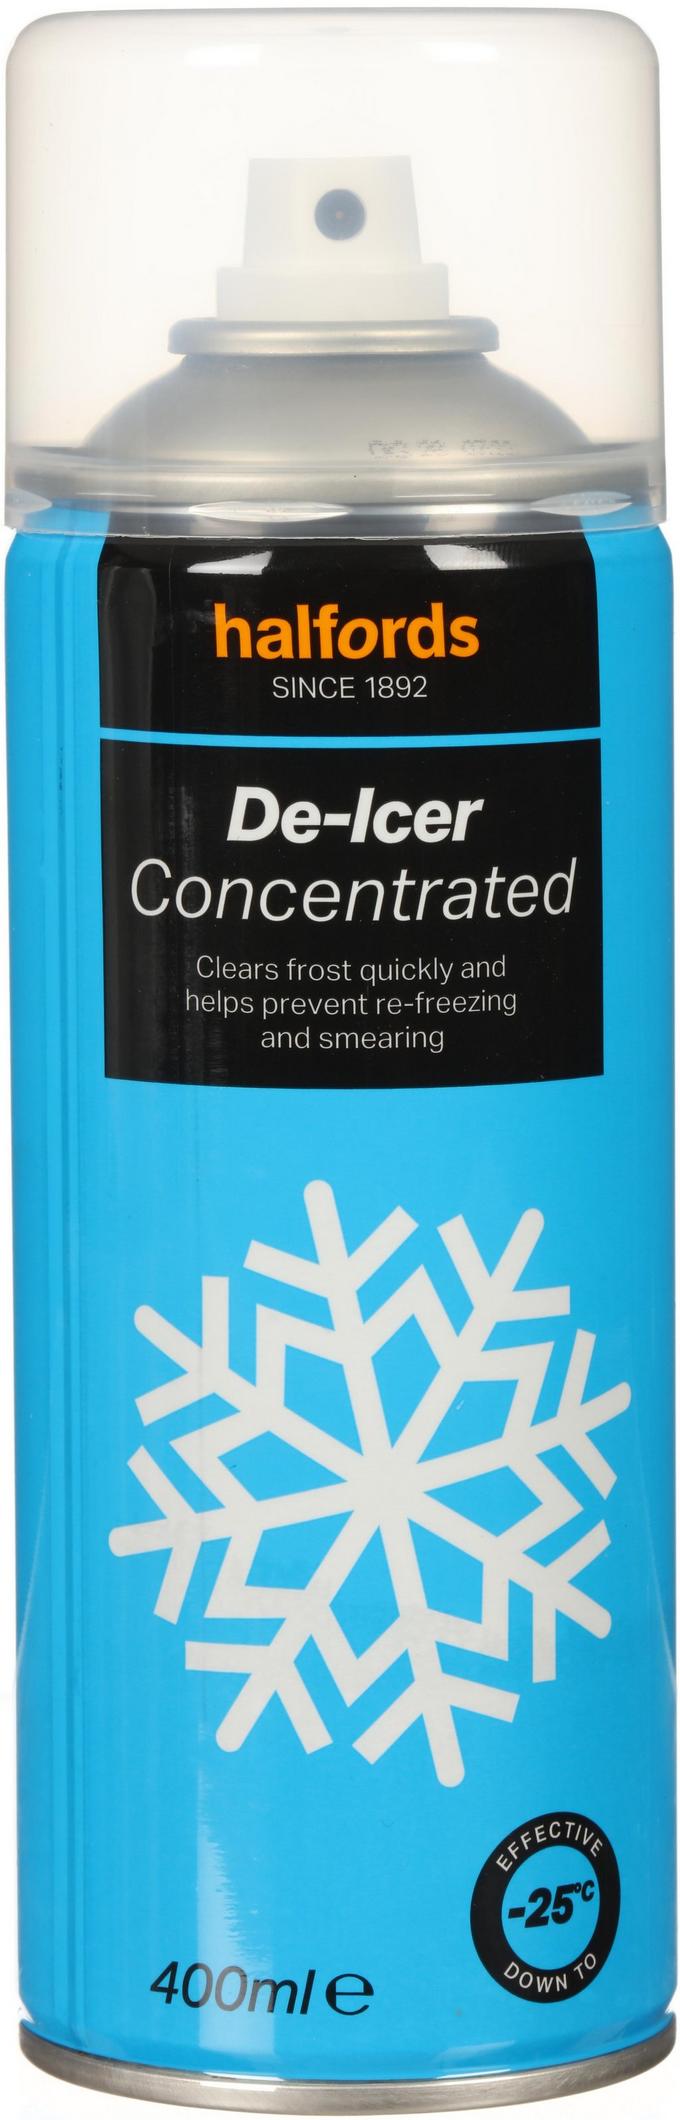  FEETT Ice Remover Spray, High-Performance Deicing Spray, Deicer  Spray for Car Windshield, Windshield De-Icer, De Icer for Car Windshield,  Winter Car Essentials for Removing Snow (3PCS) : Home & Kitchen